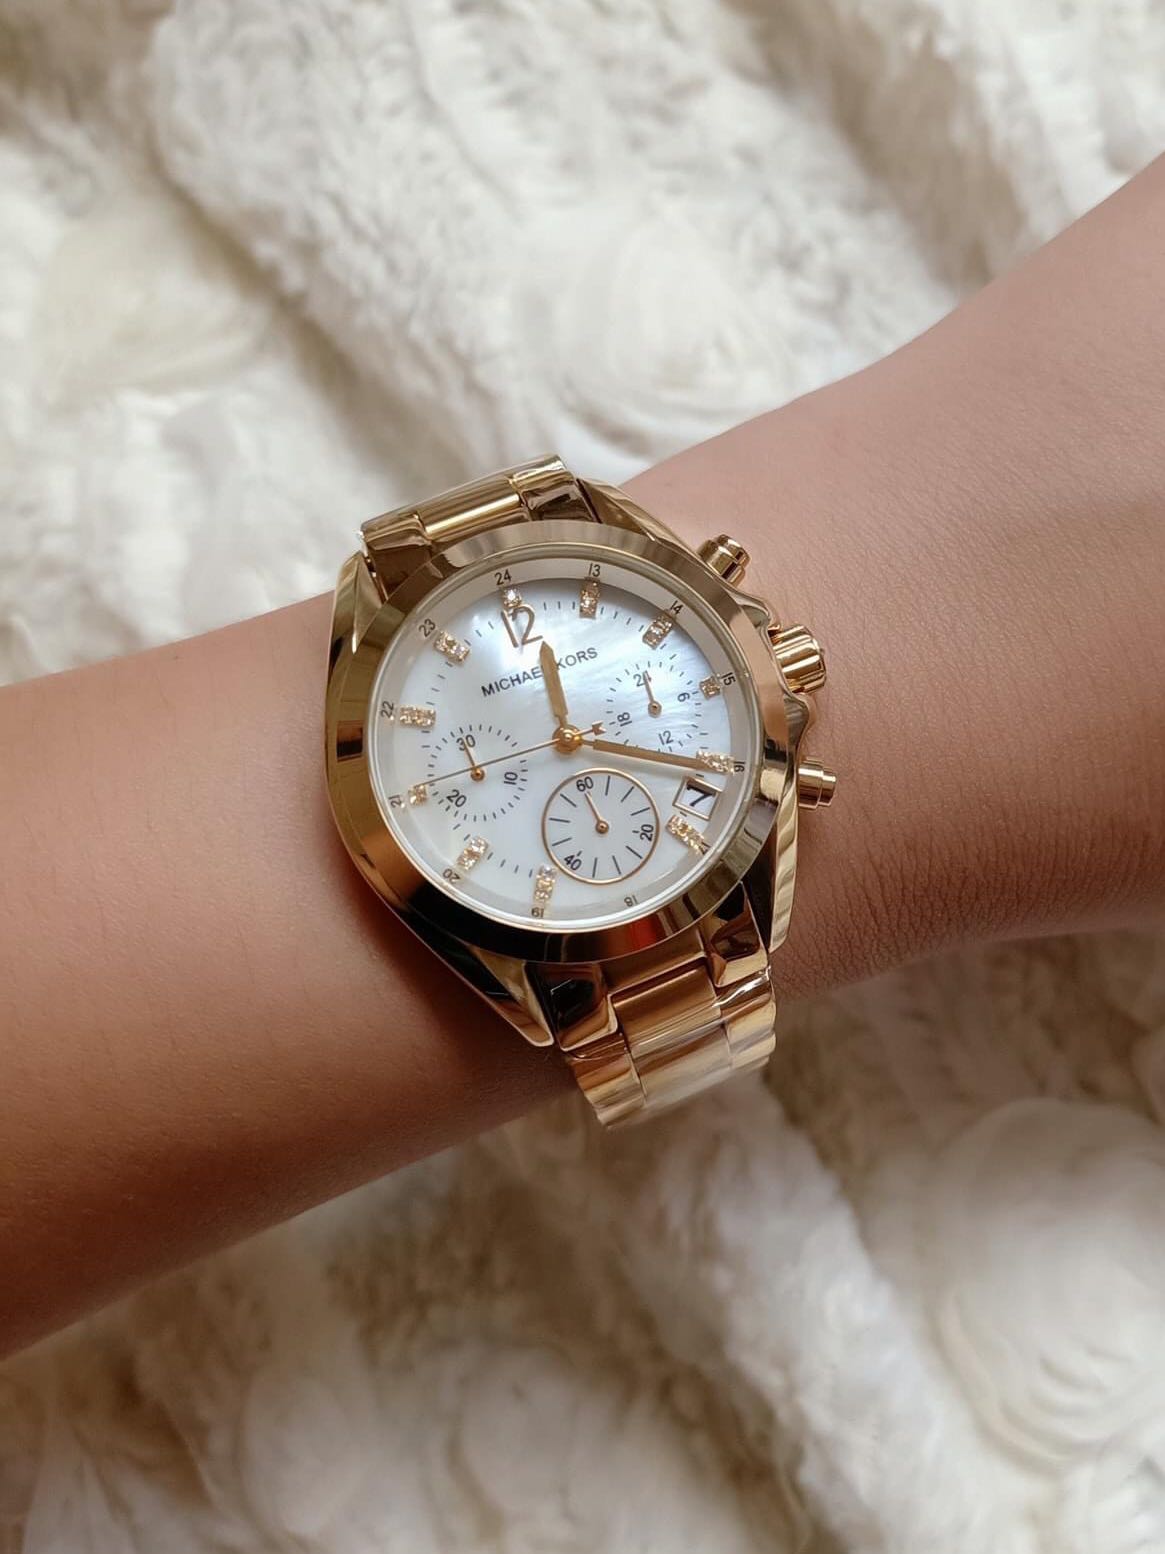 michael kors mother of pearl watch